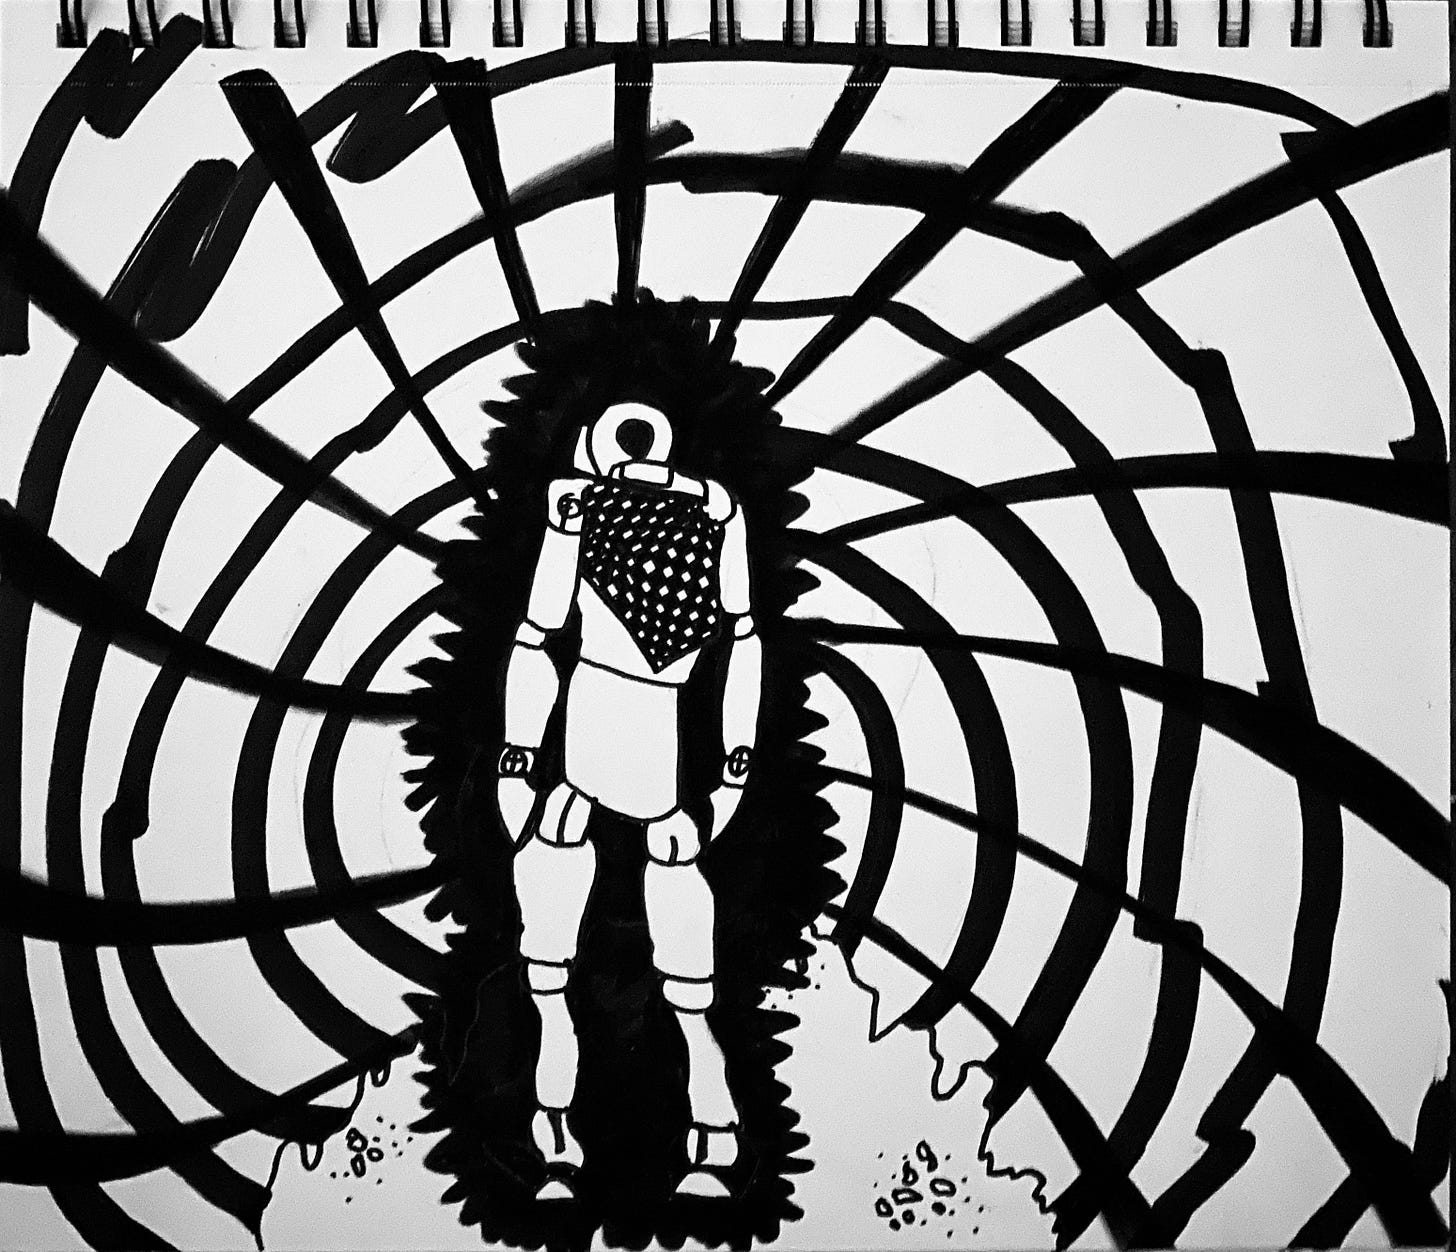 Black and white ink drawing of a robot/humanoid figure walking into a swirling void.